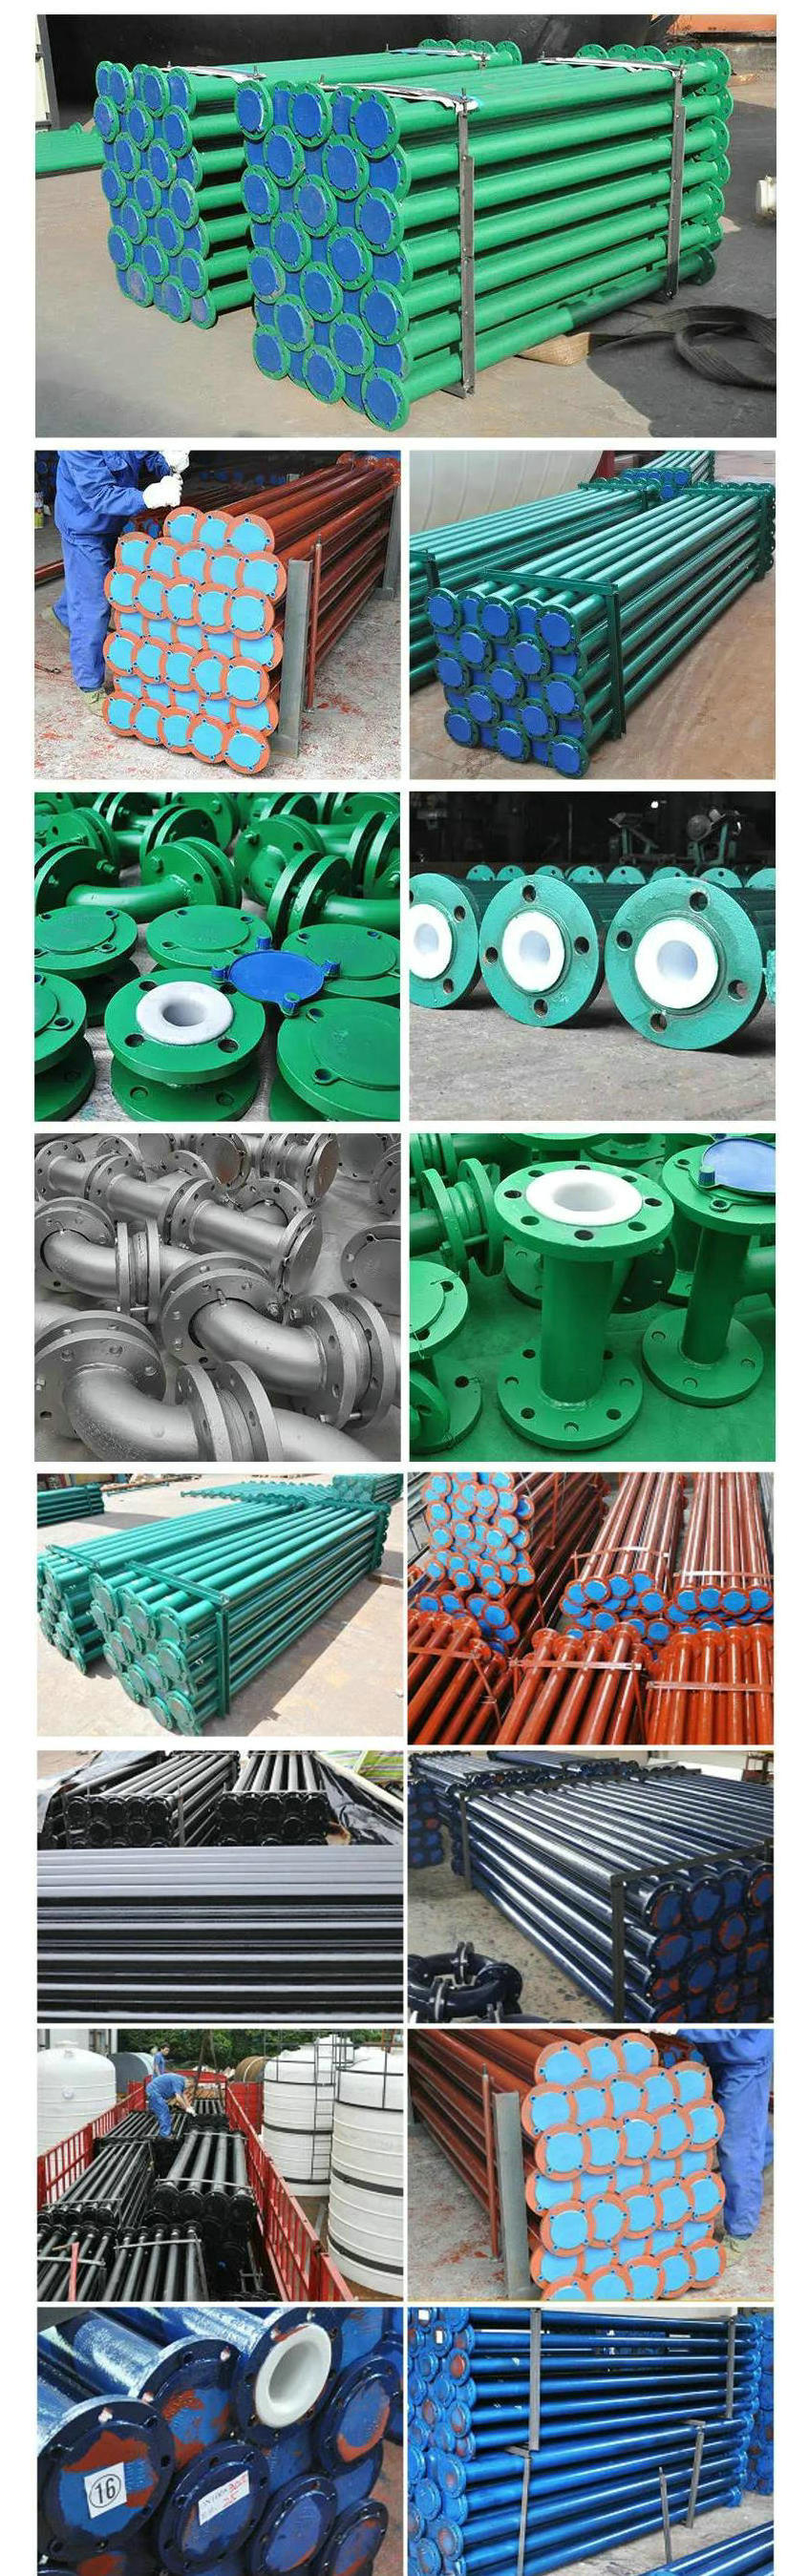 Chemical Pipeline PE Lined Carbon Steel Pipe Customizing (PE / PTFE Coating Seamless Steel Pipe)